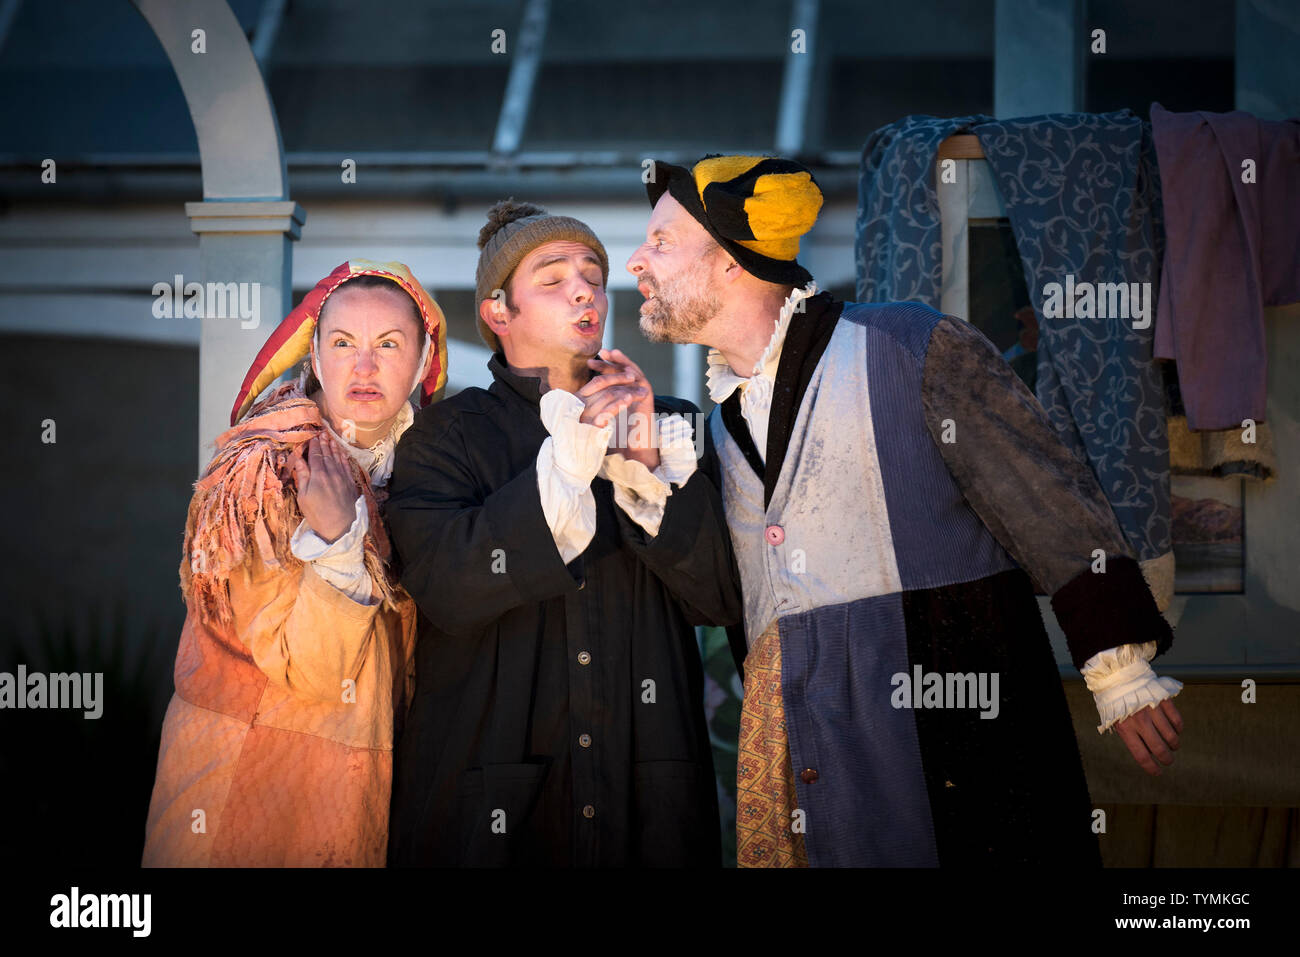 Actors Katy Helps, Chris Wills and David Sayers performing the roles of Trinculo, Caliban and Stephano in an outdoor theatre production of The Tempest Stock Photo